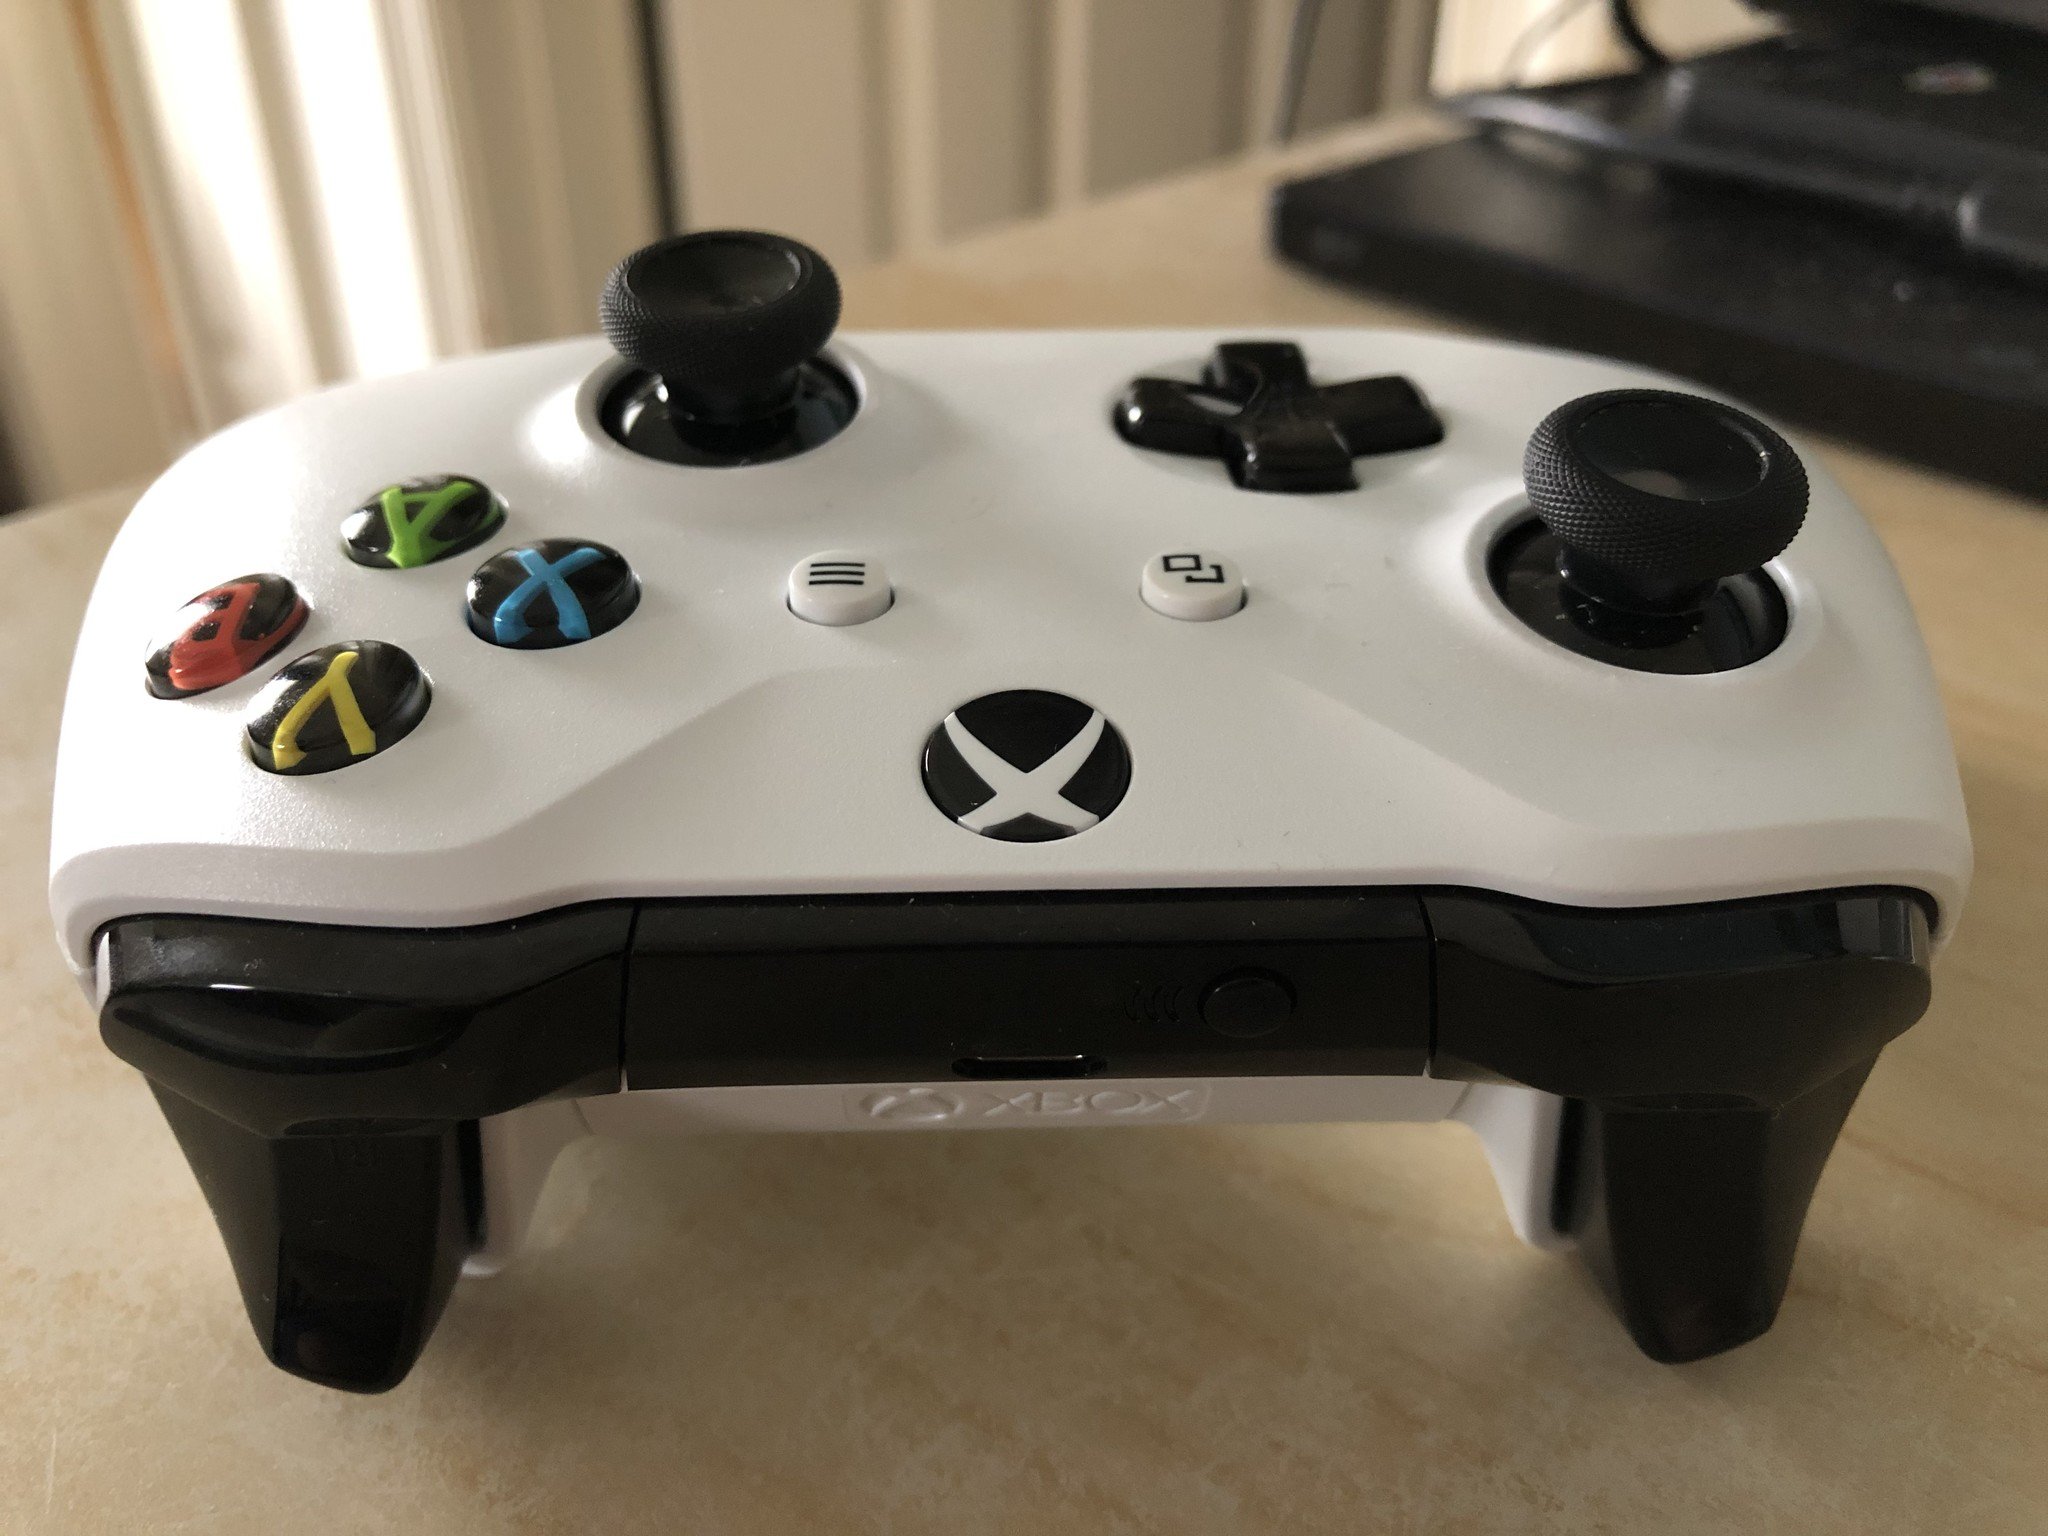 Xbox One controllers with Bluetooth capability will have black triggers and shoulder buttons, and white plastic around the round Xbox button on the face of the controller.